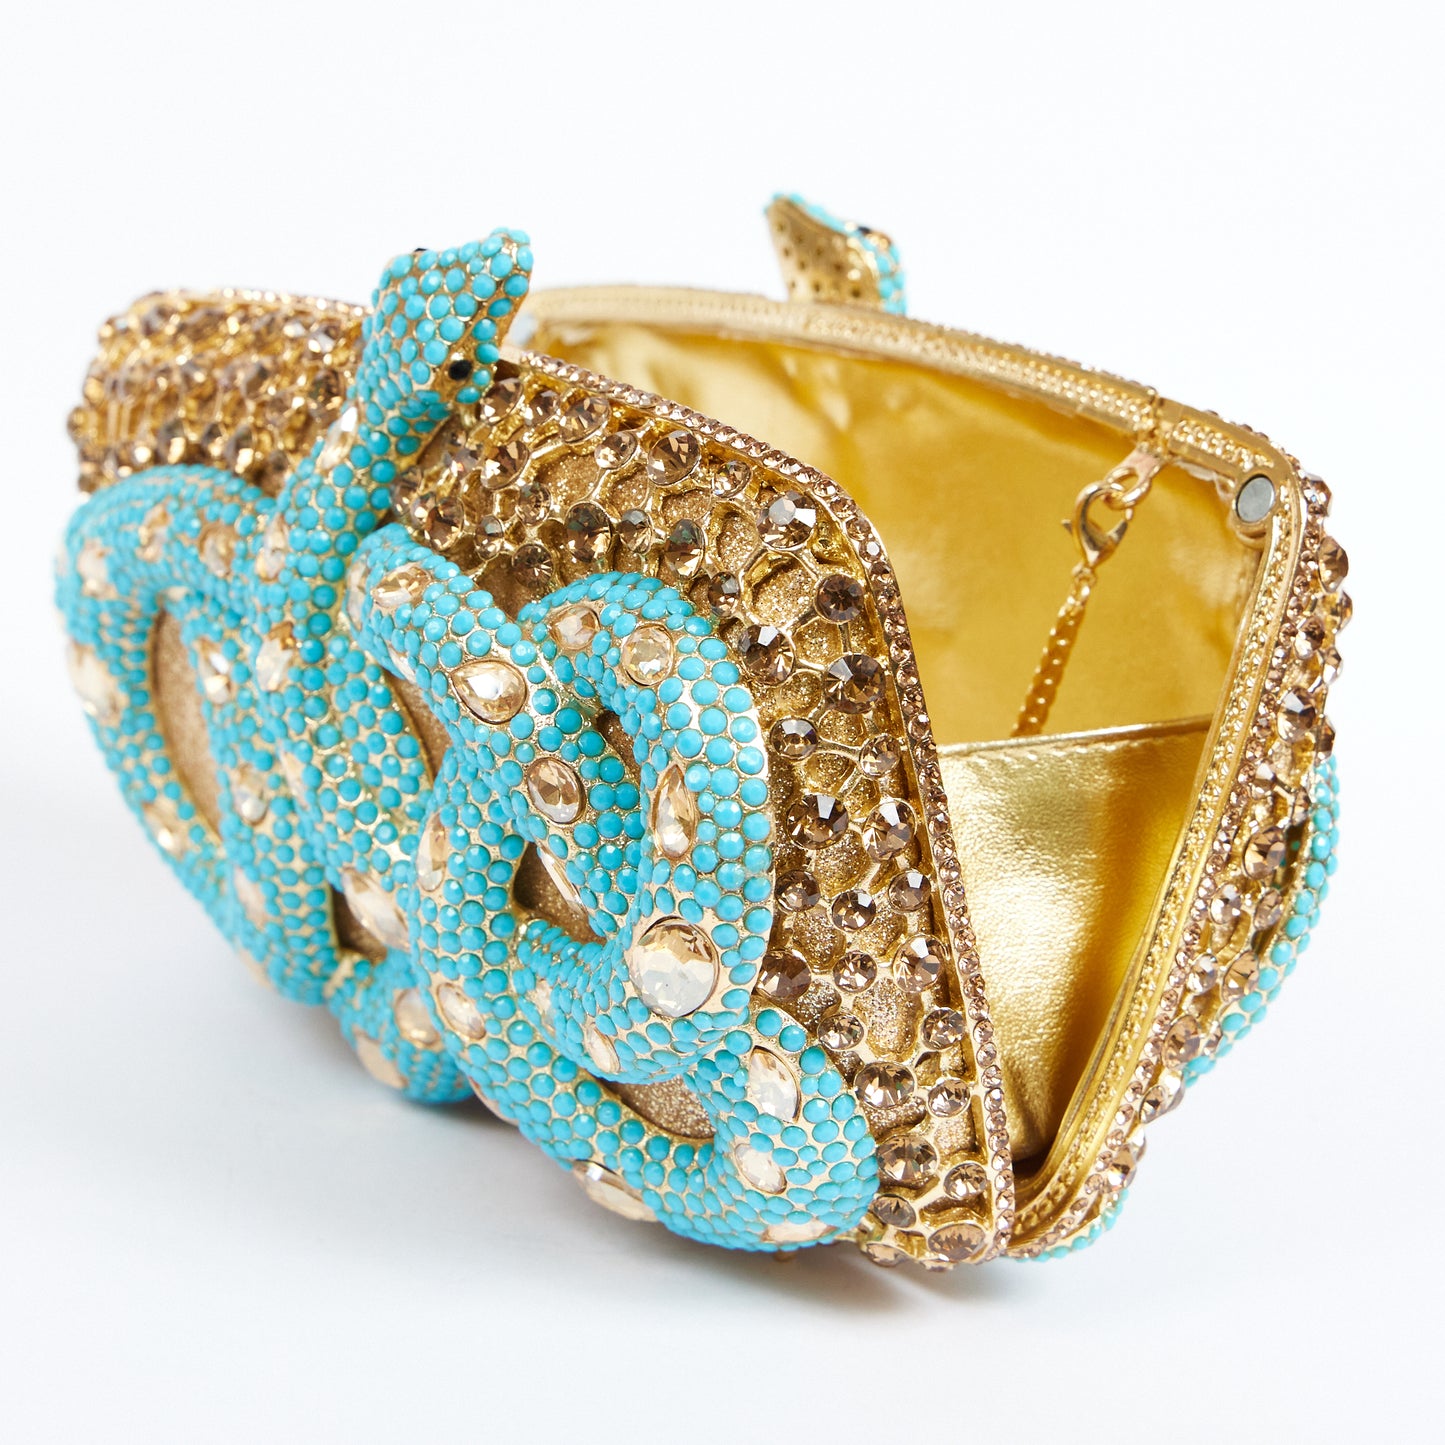 Turquoise Snake Clutch